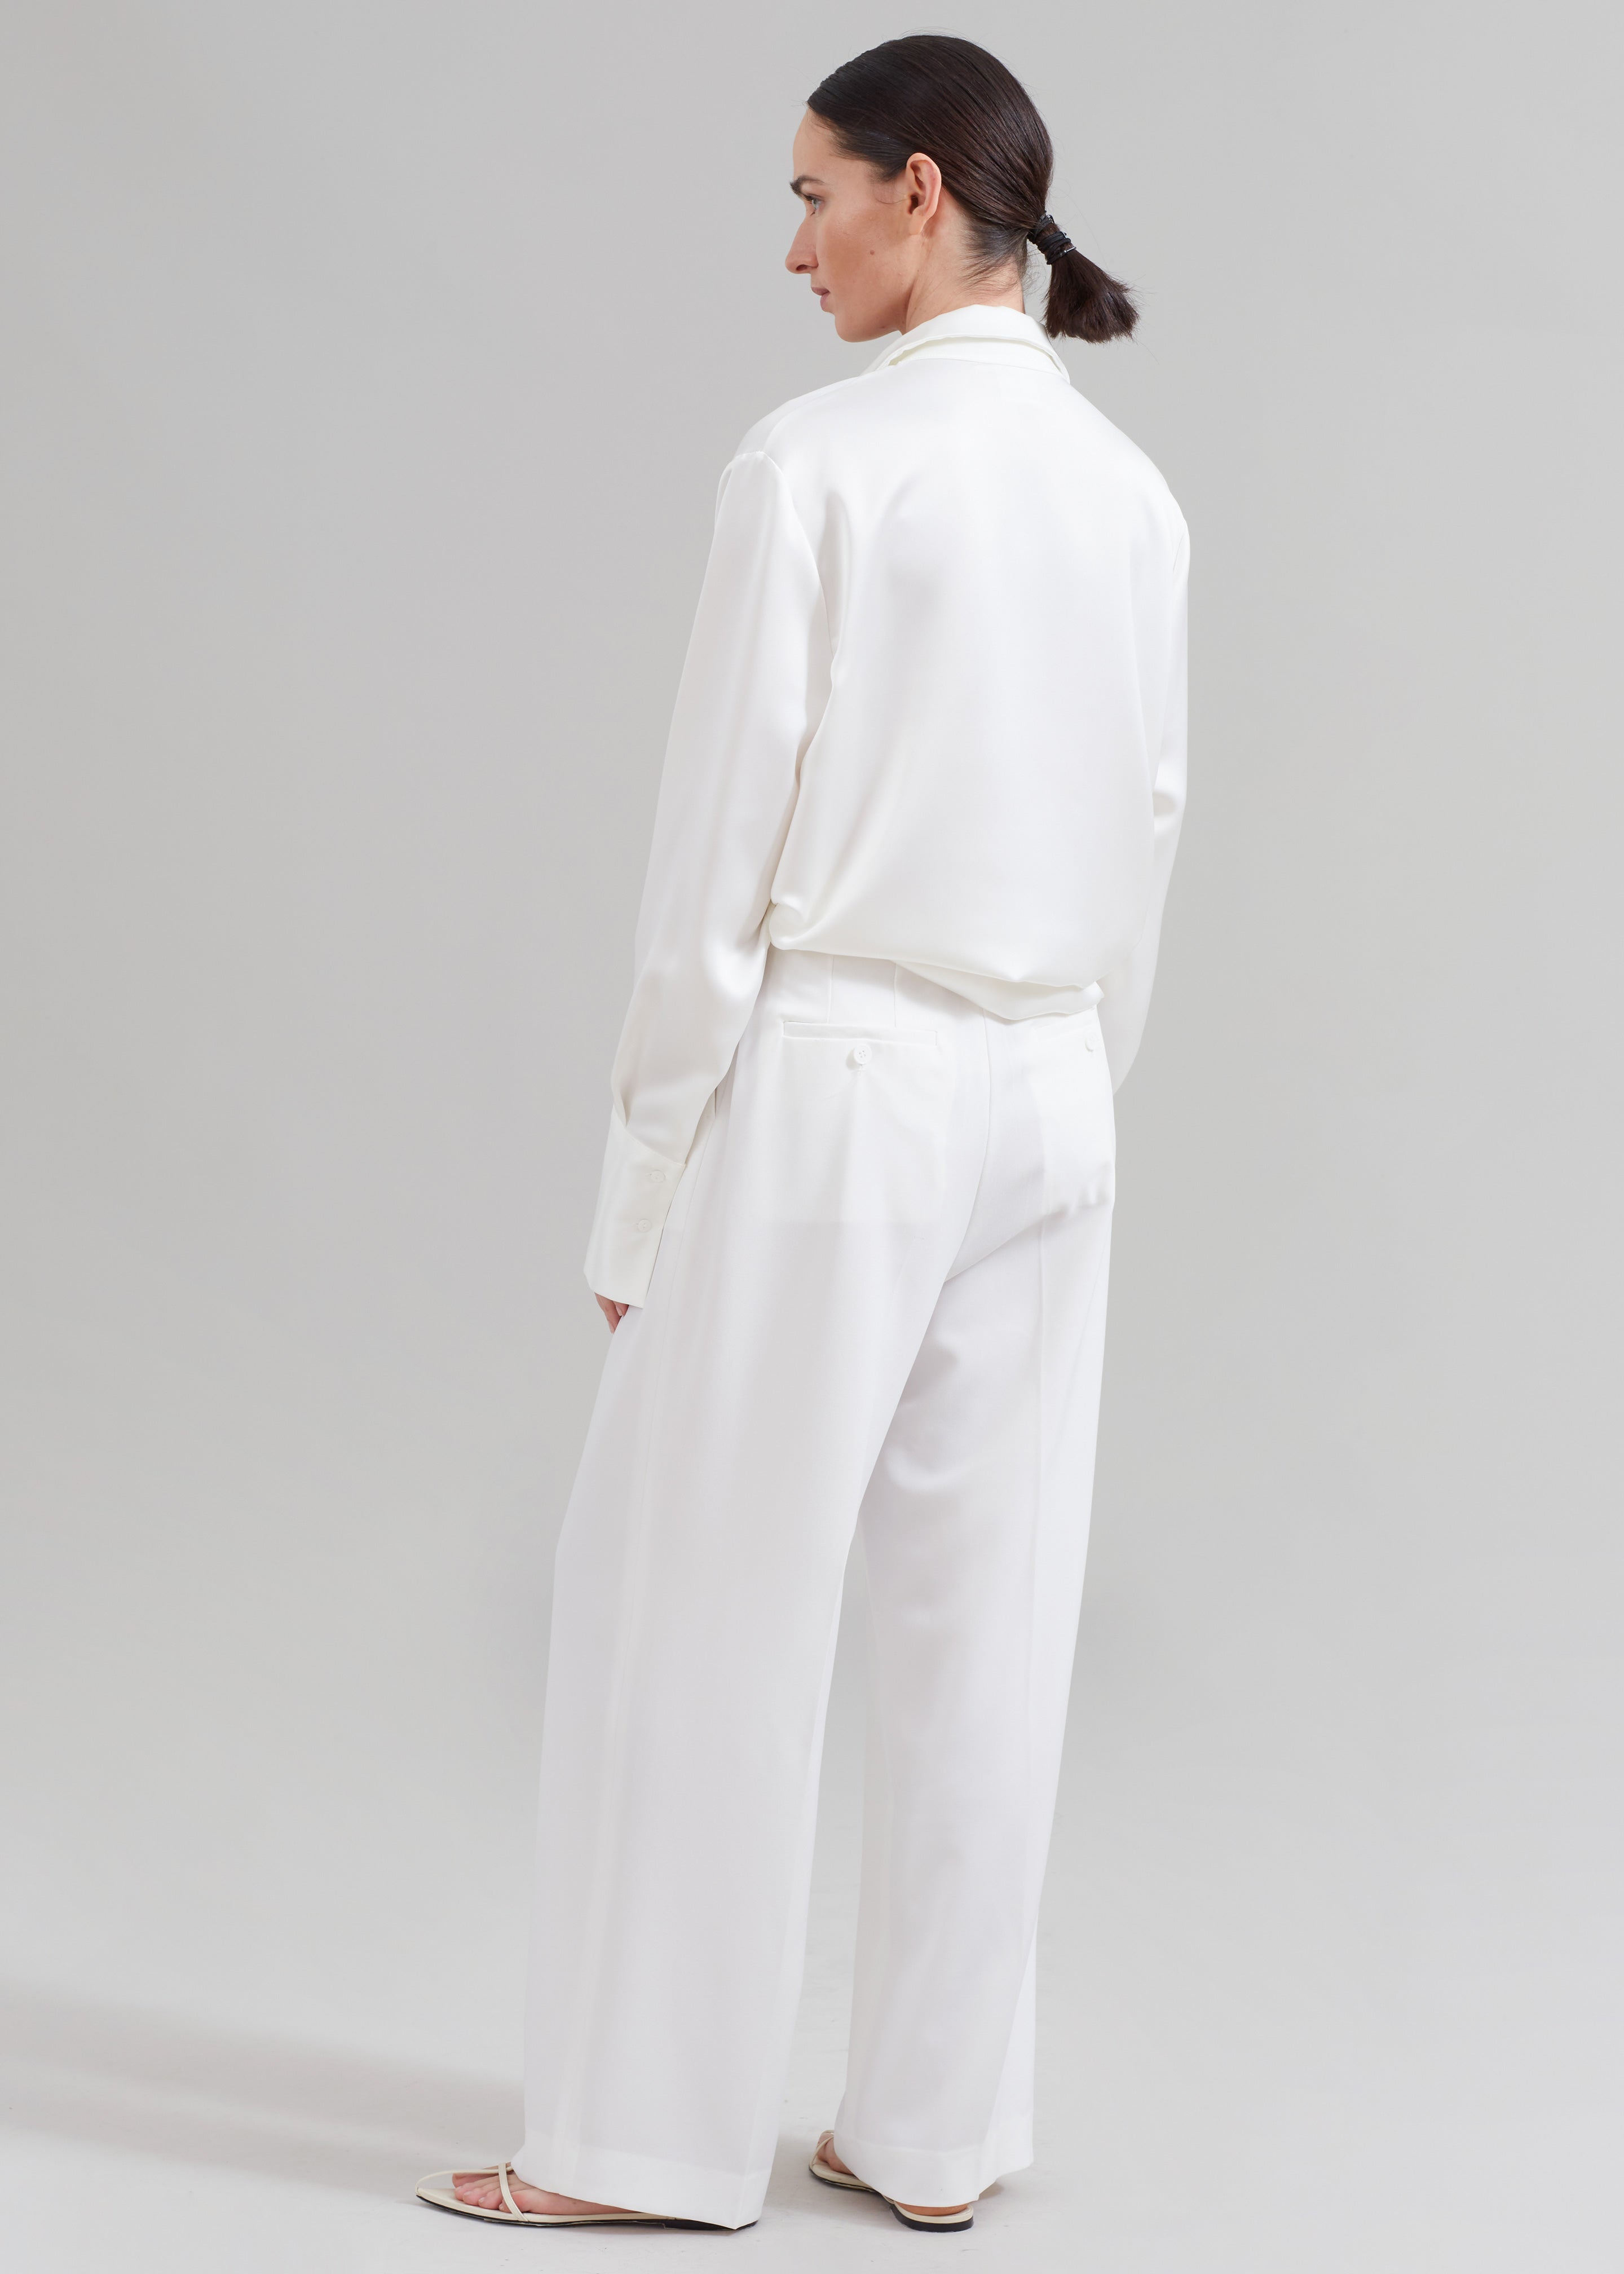 Nessi Pintuck Trousers - White - 9